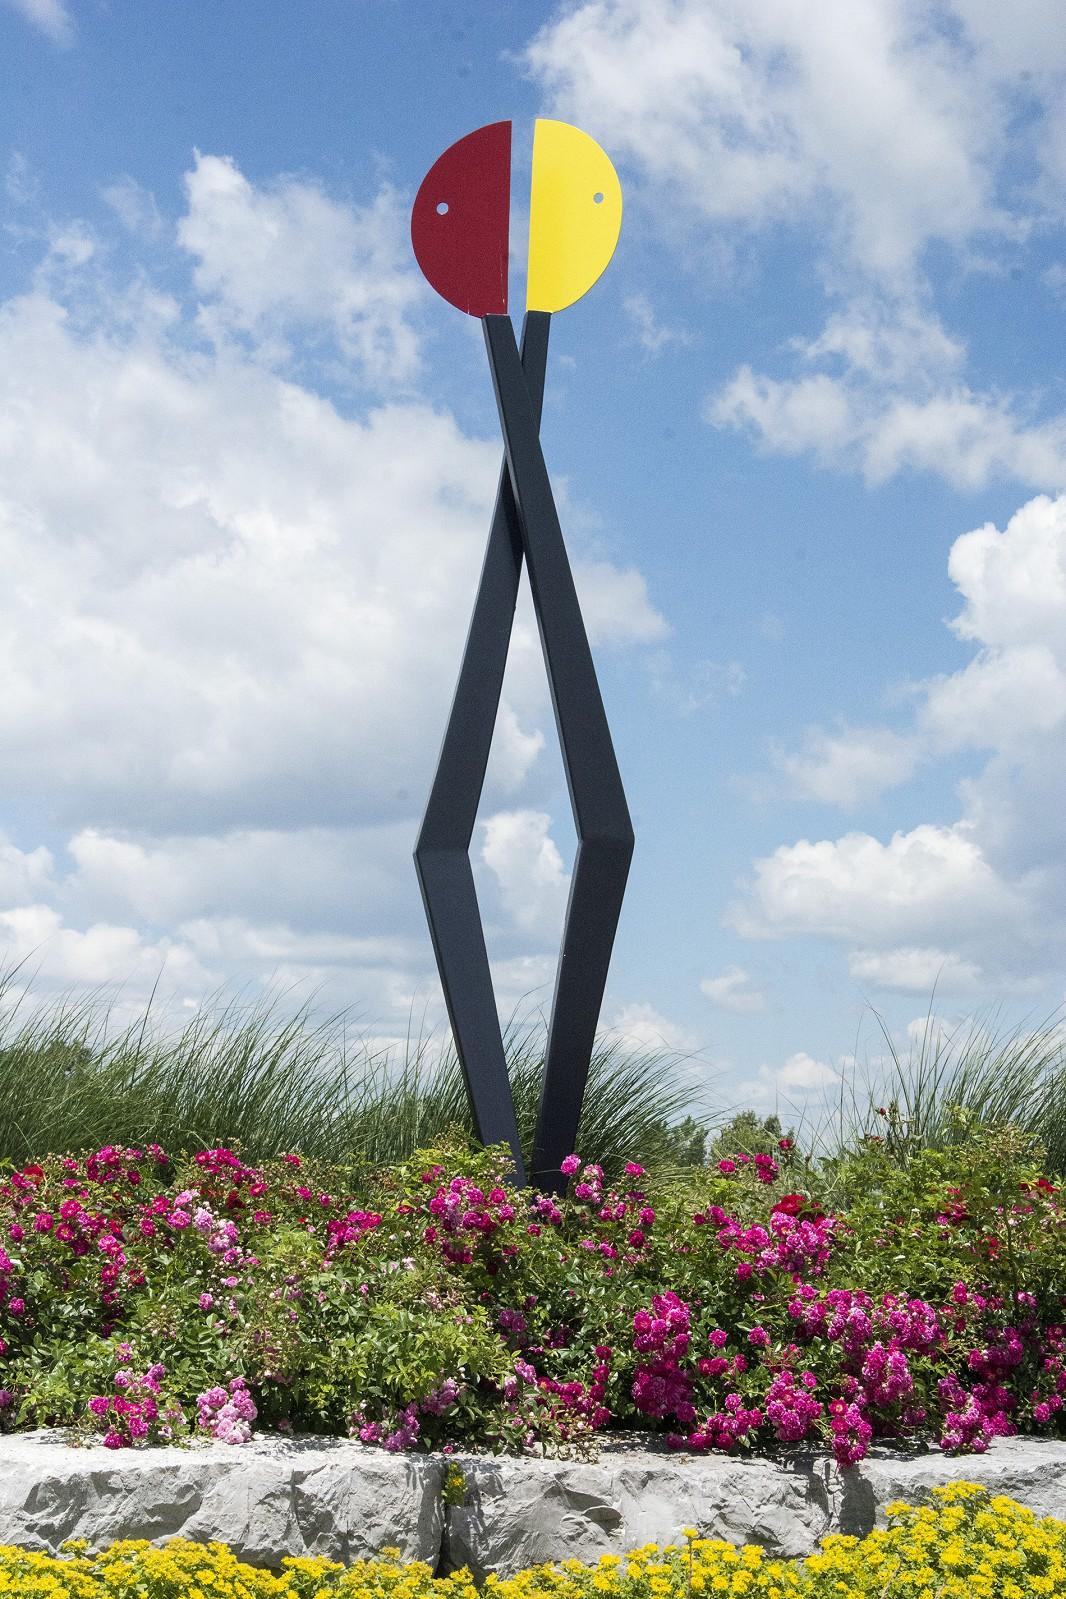 R. Clark Ellis Abstract Sculpture - Past Conversations - colourful, playful, abstracted figures, steel sculpture